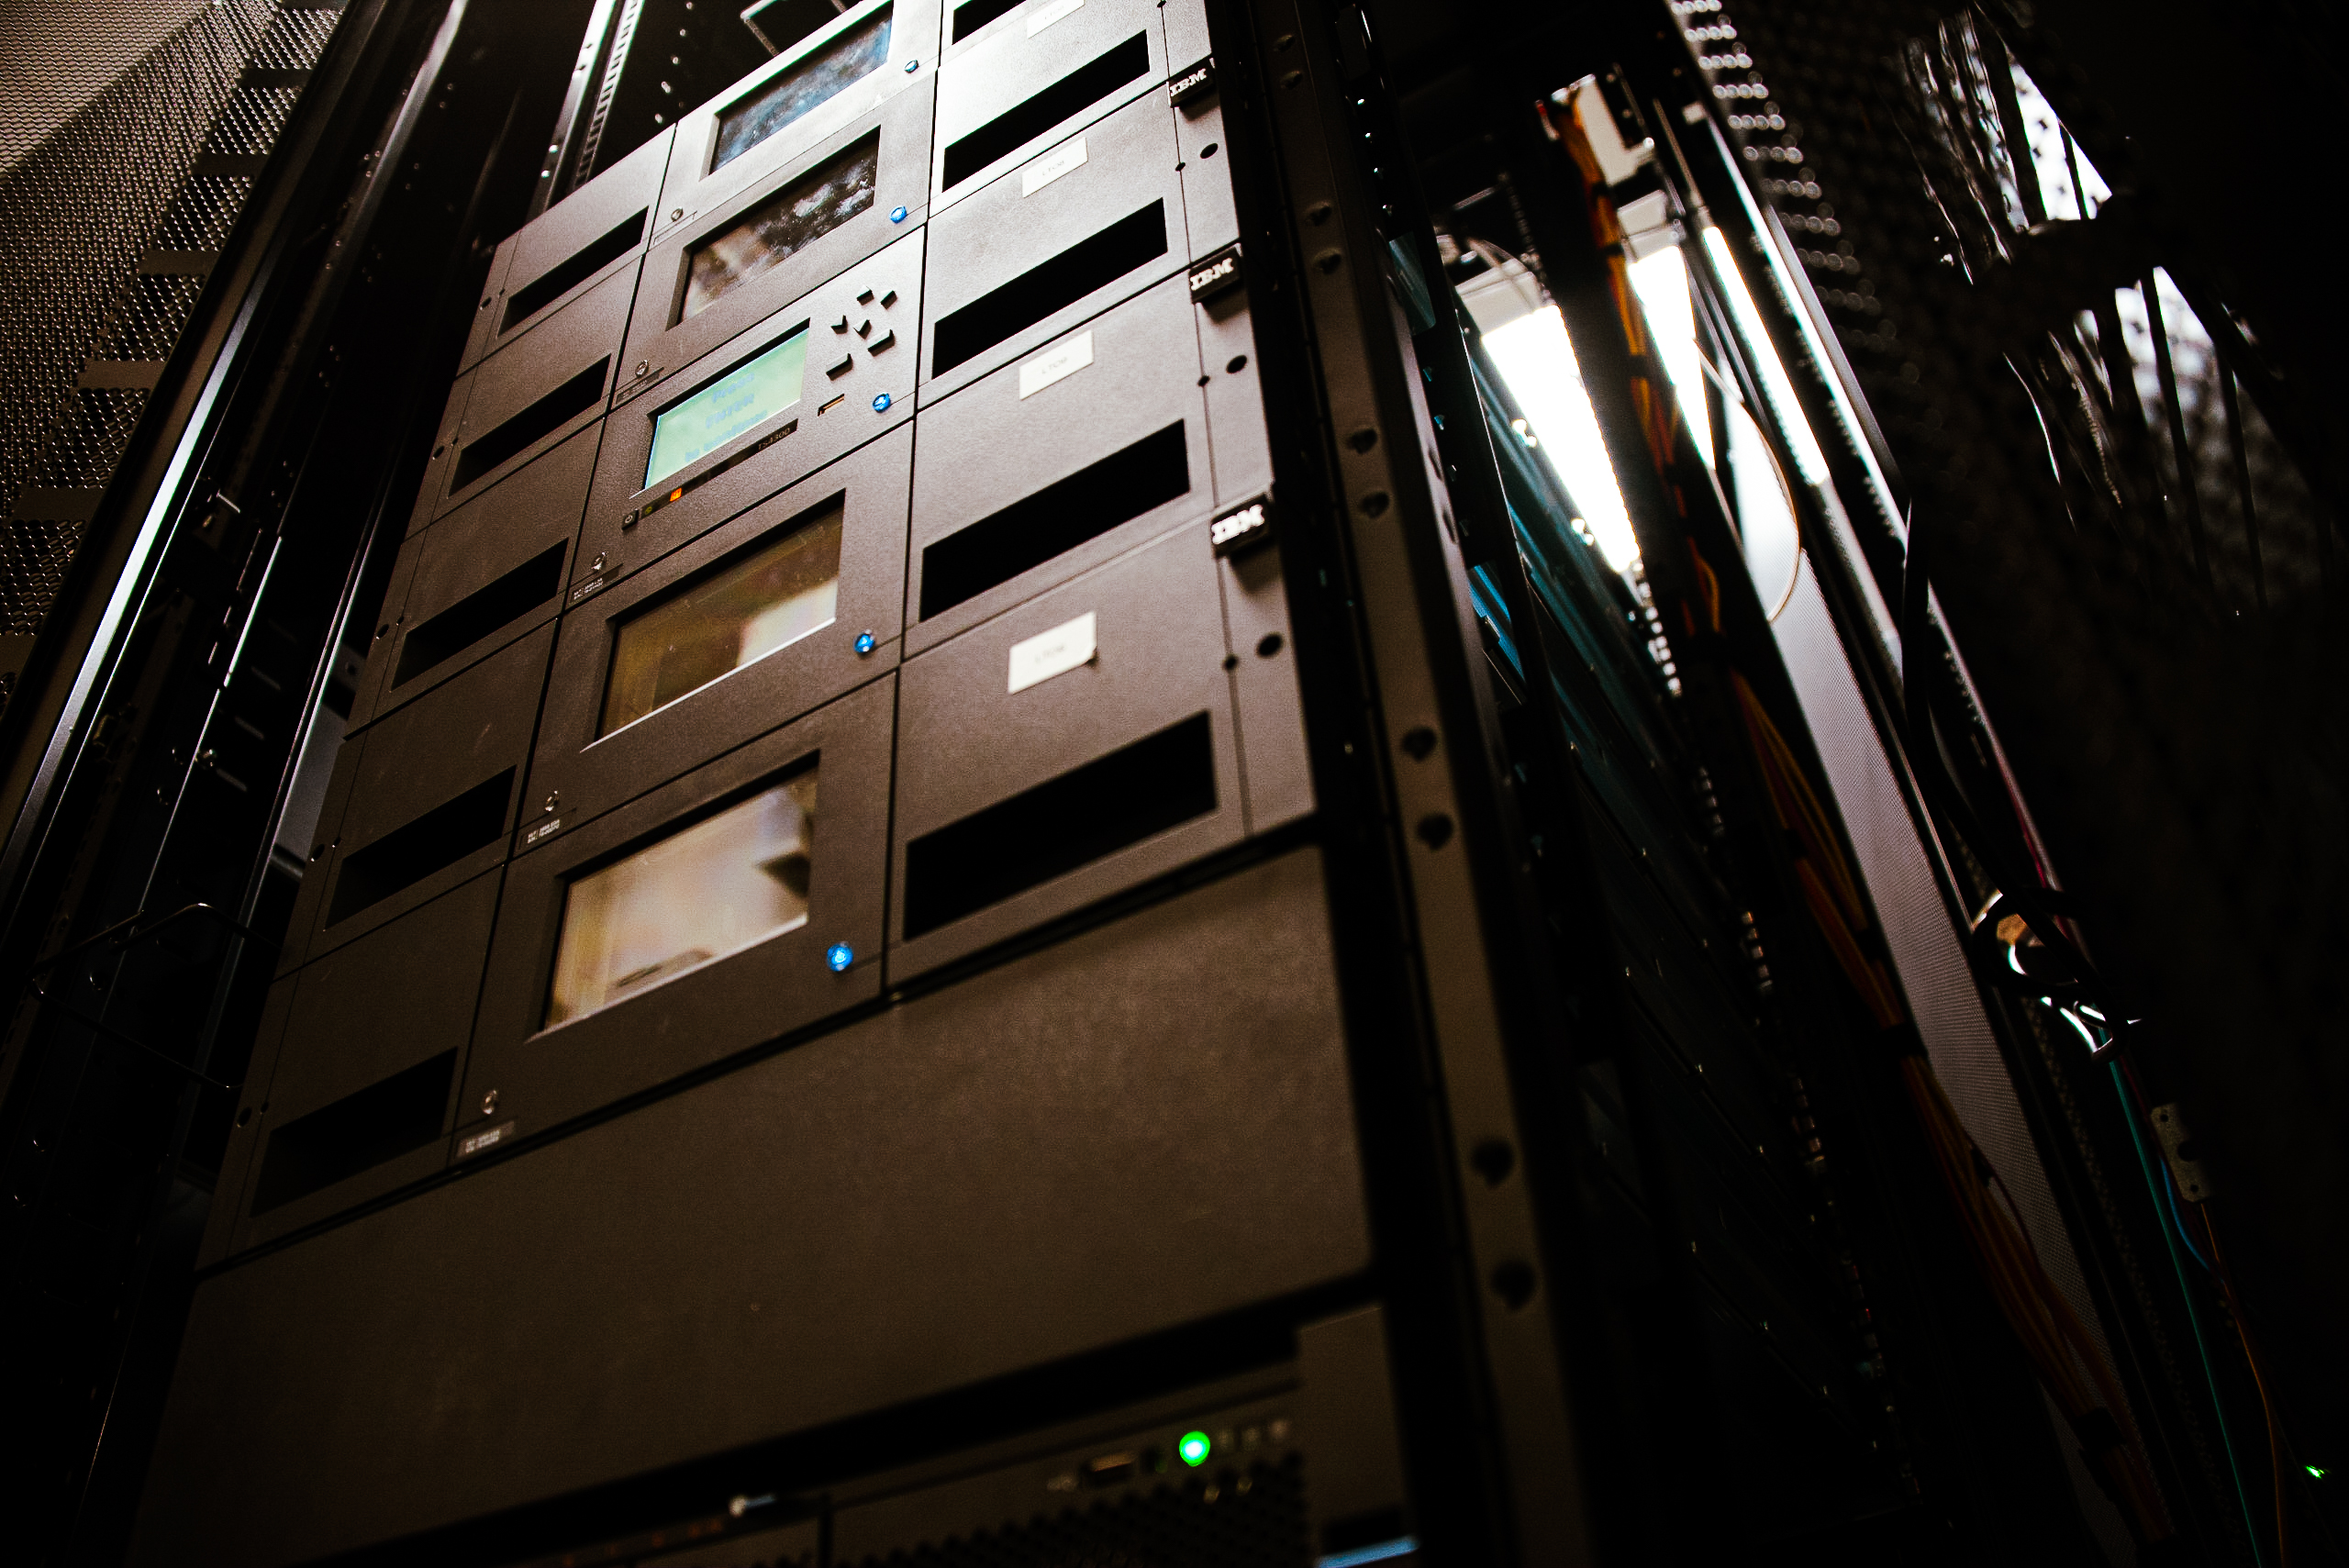 Covenco tape libraries delivering immutable backups for customer data in the UK